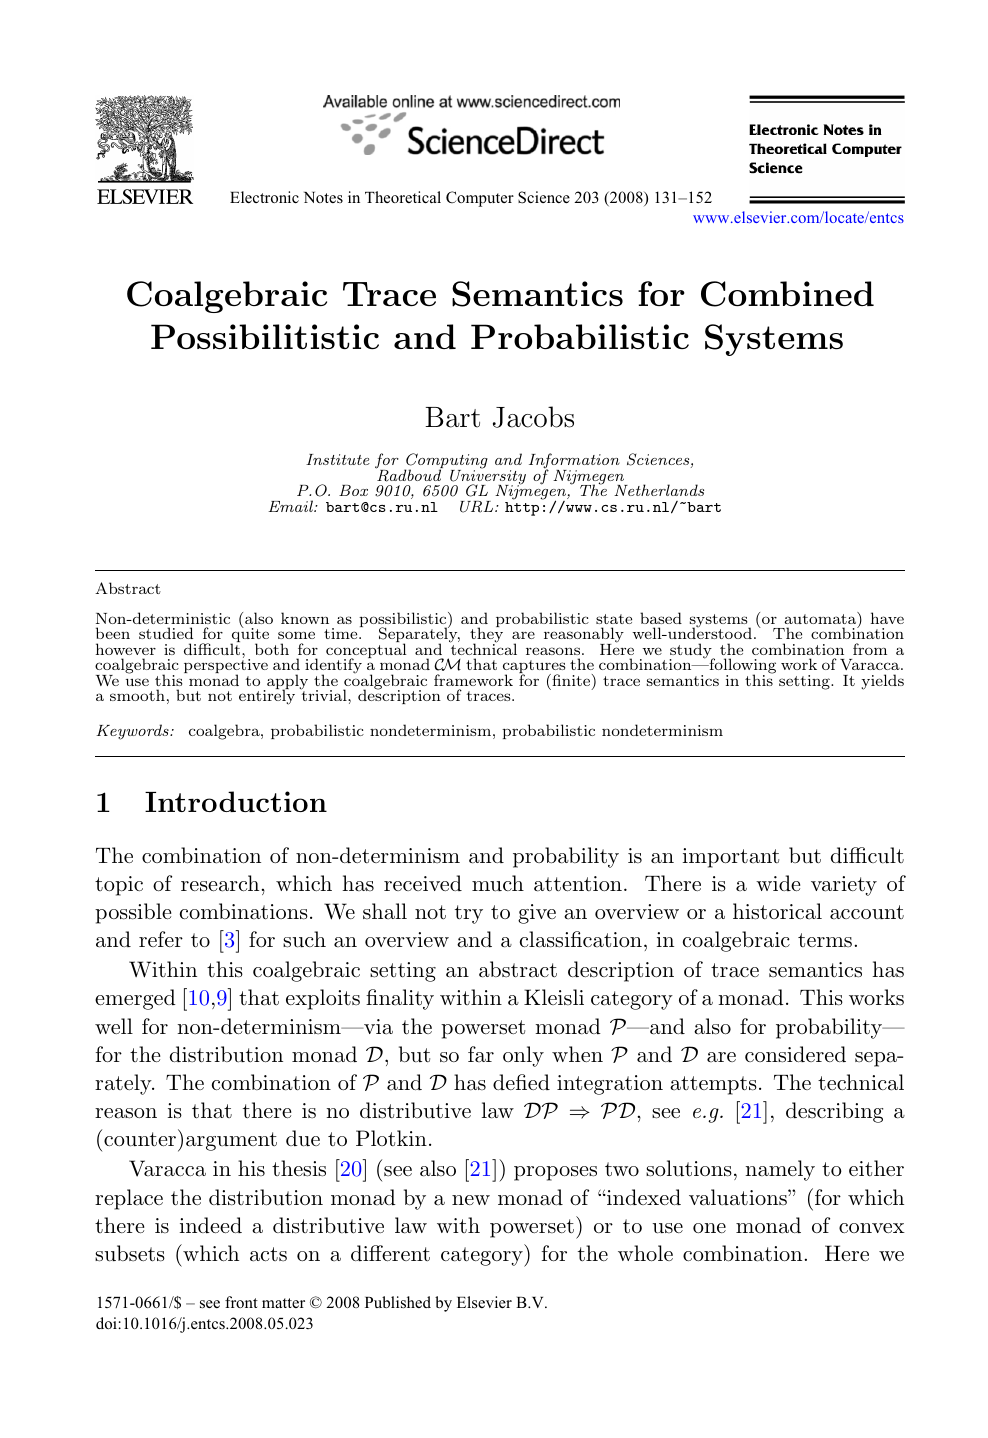 Coalgebraic Trace Semantics For Combined Possibilitistic And Probabilistic Systems Topic Of Research Paper In Computer And Information Sciences Download Scholarly Article Pdf And Read For Free On Cyberleninka Open Science Hub